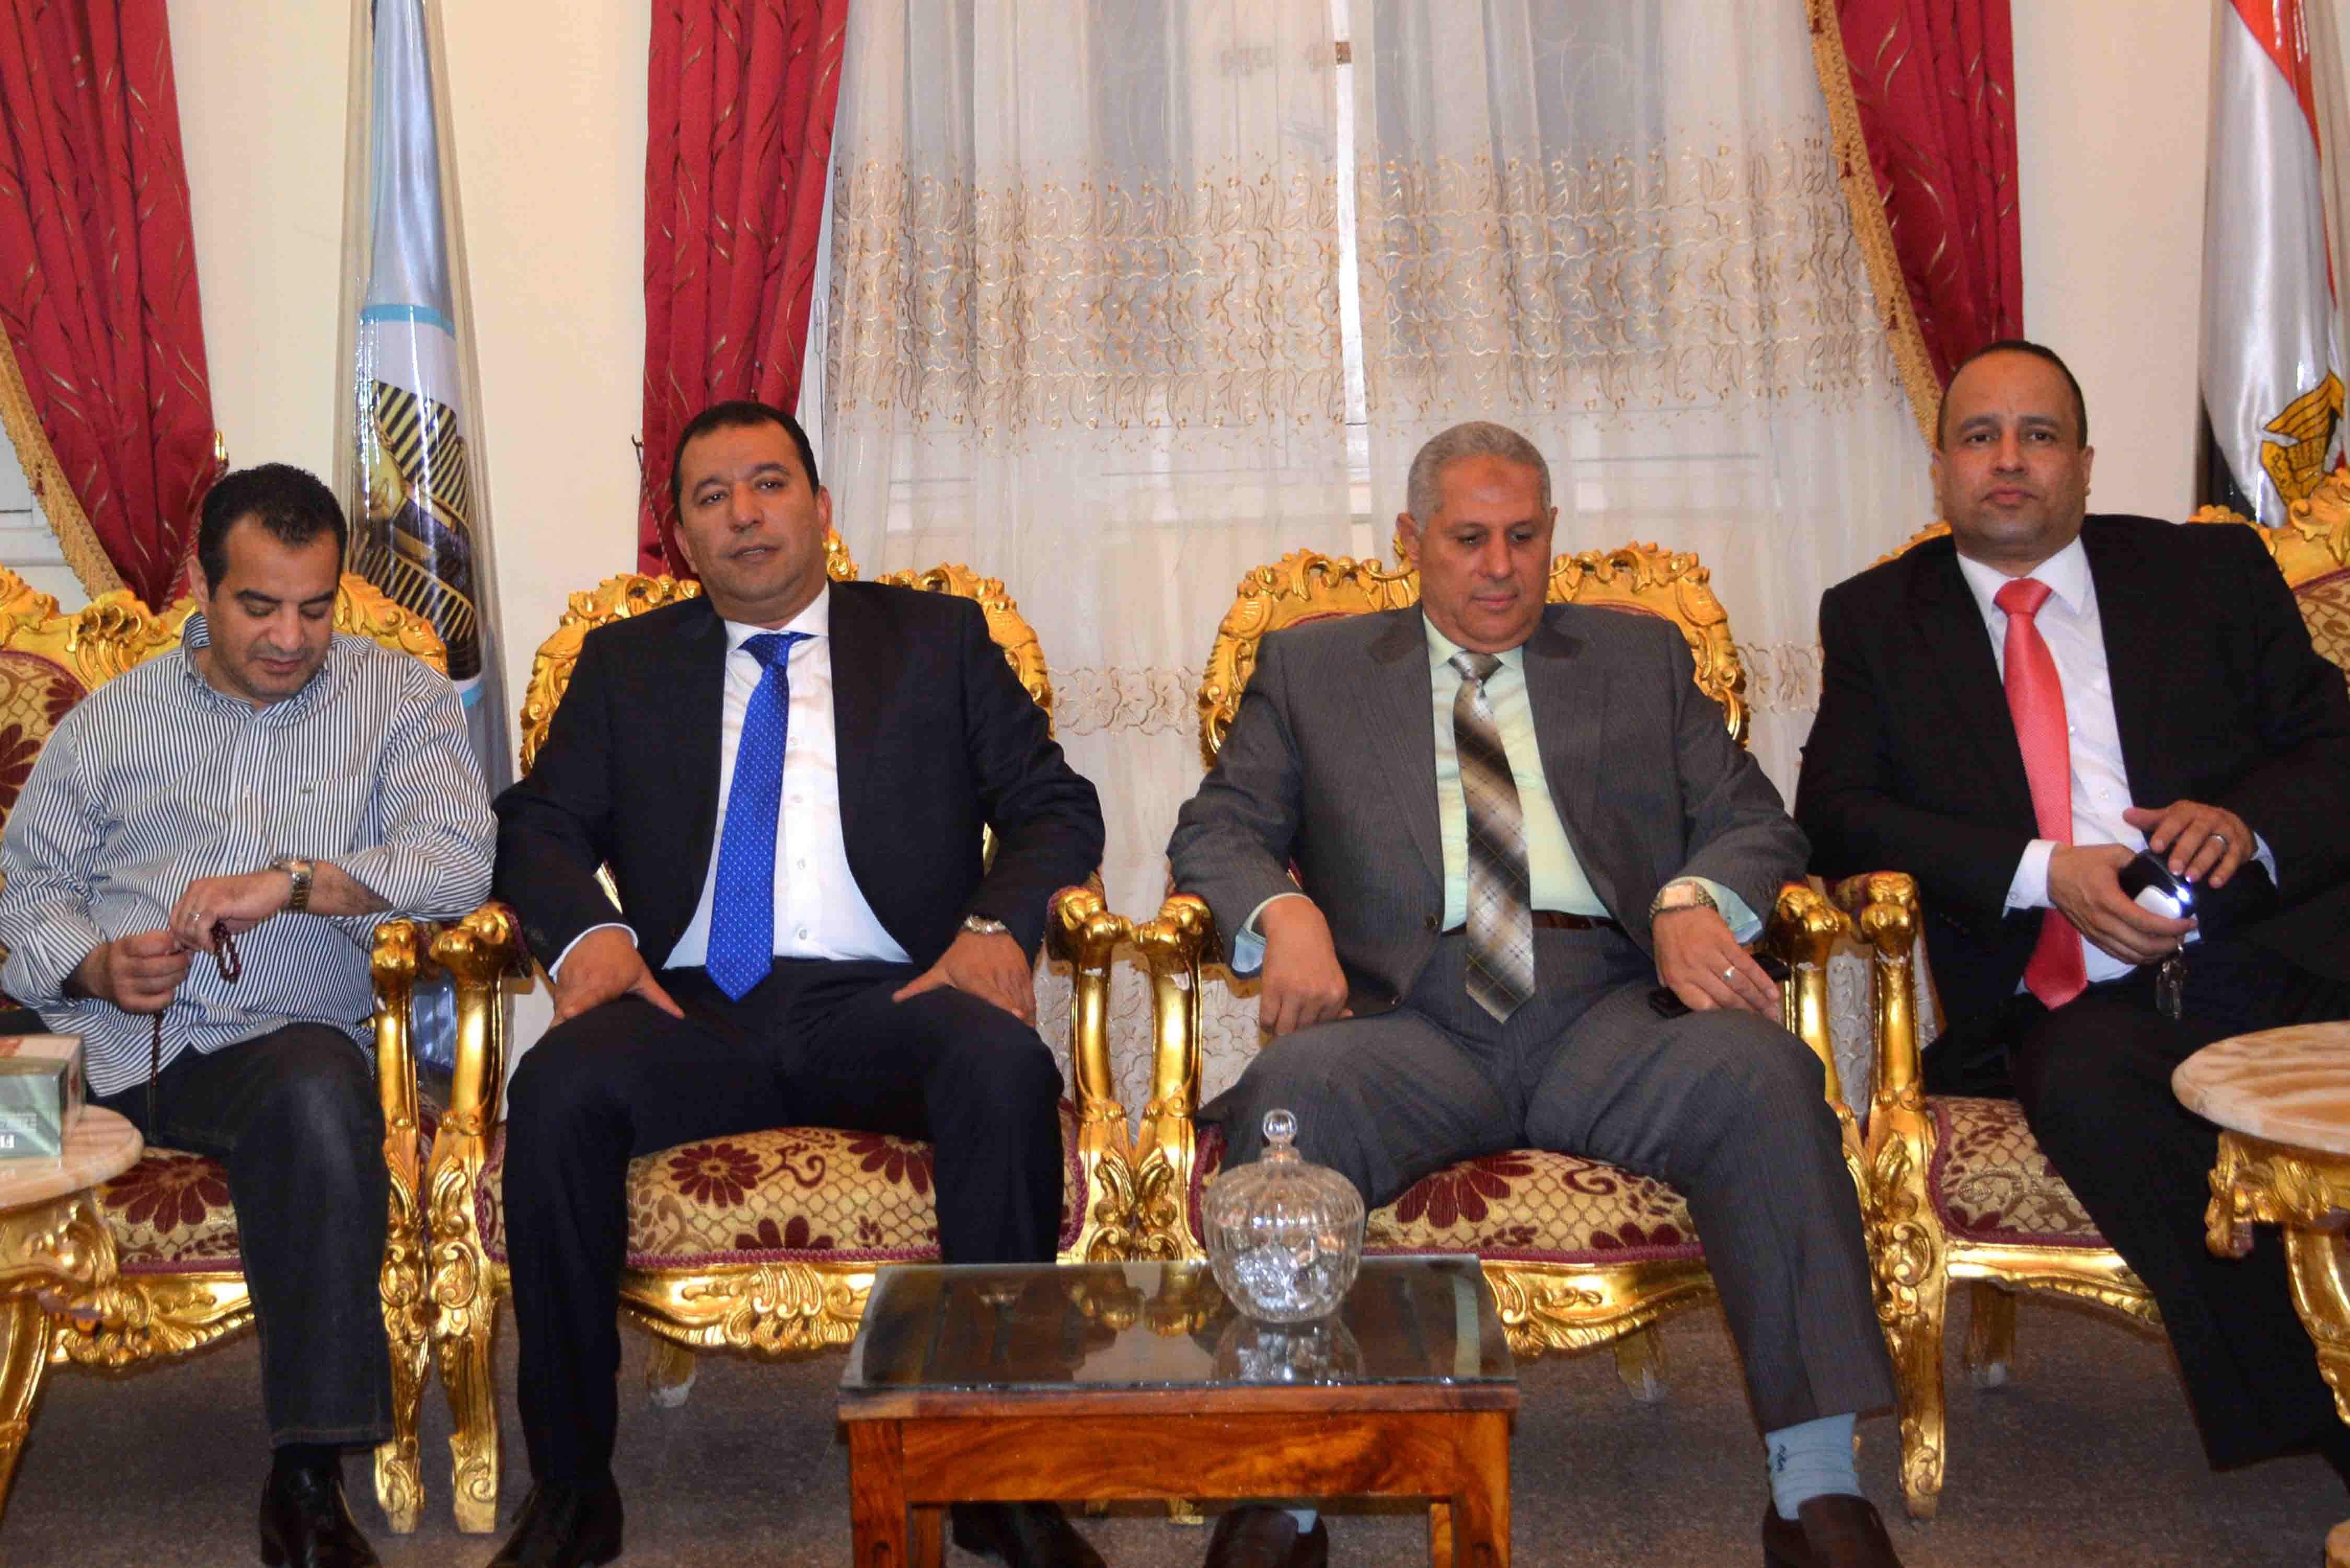 Governor of Luxor congratulates Copts on Easter